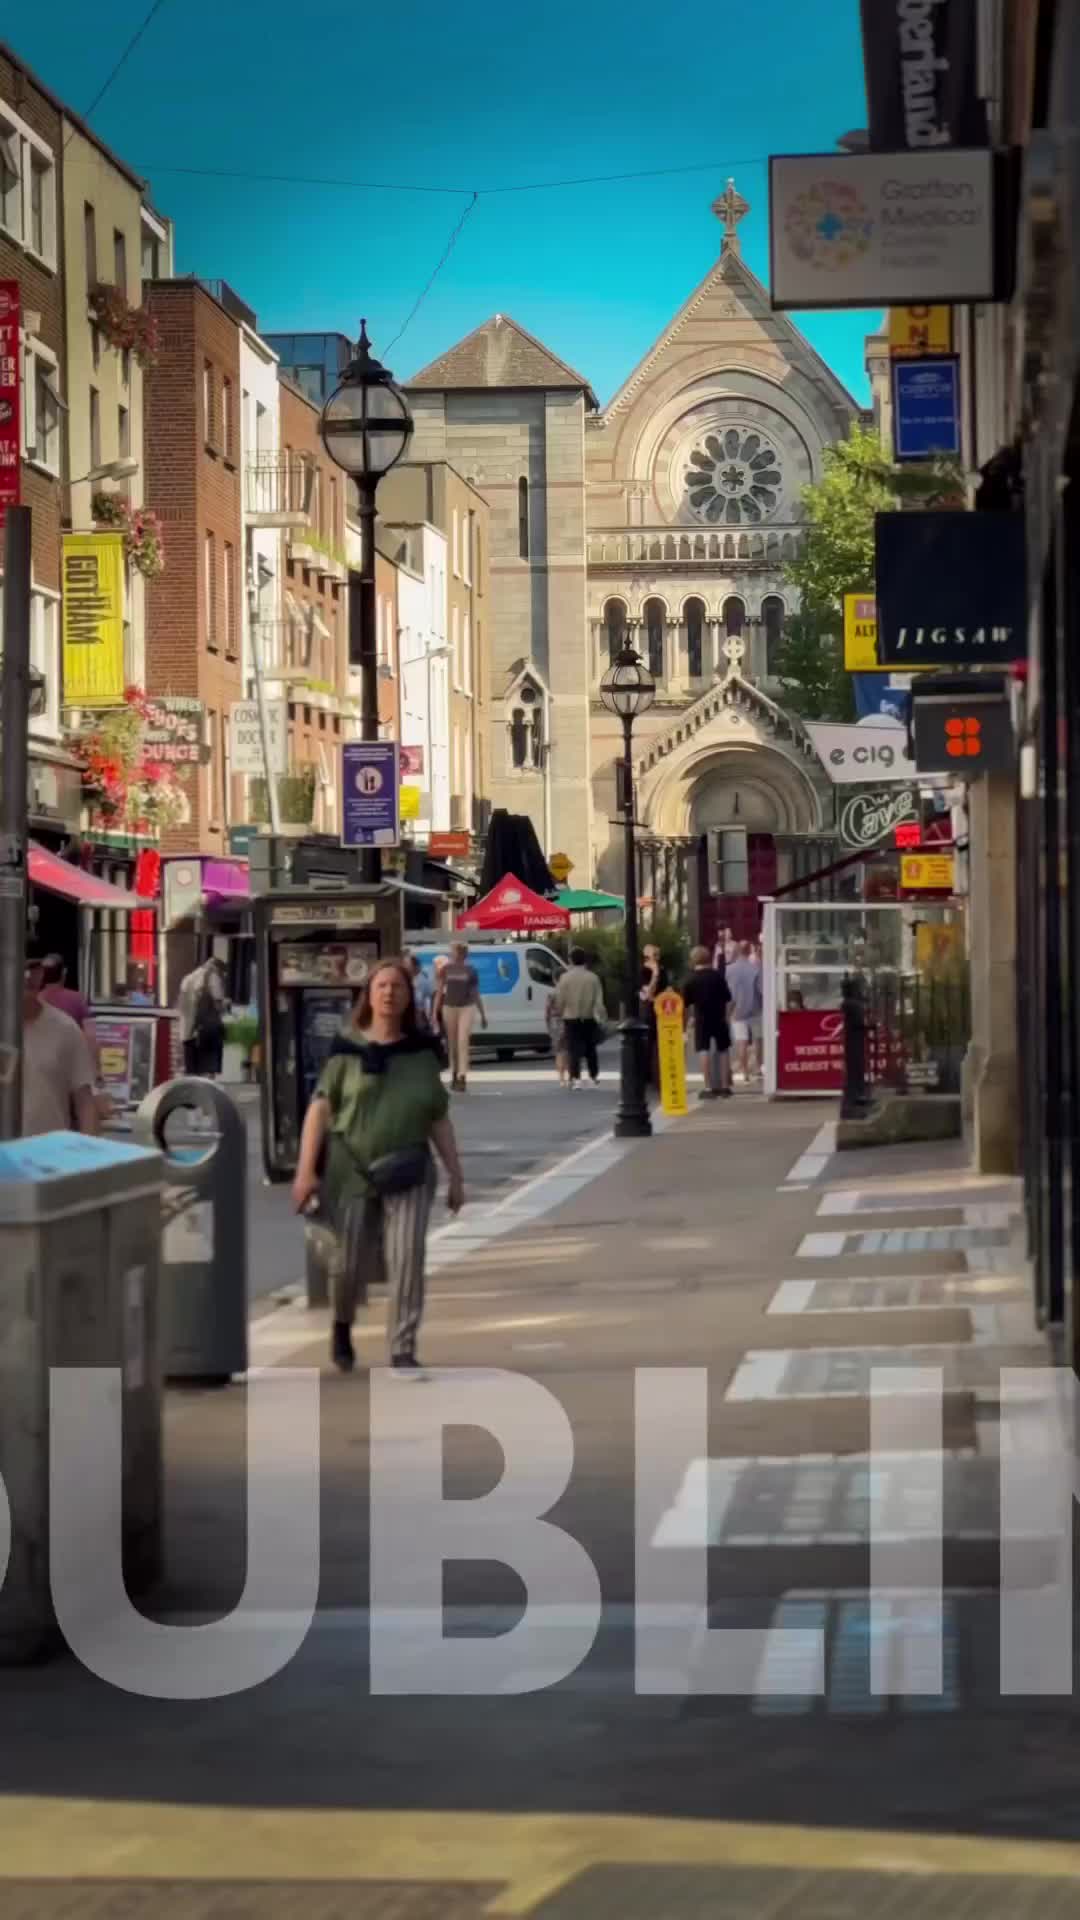 Explore Dublin: Vlogs, Food, and City Life